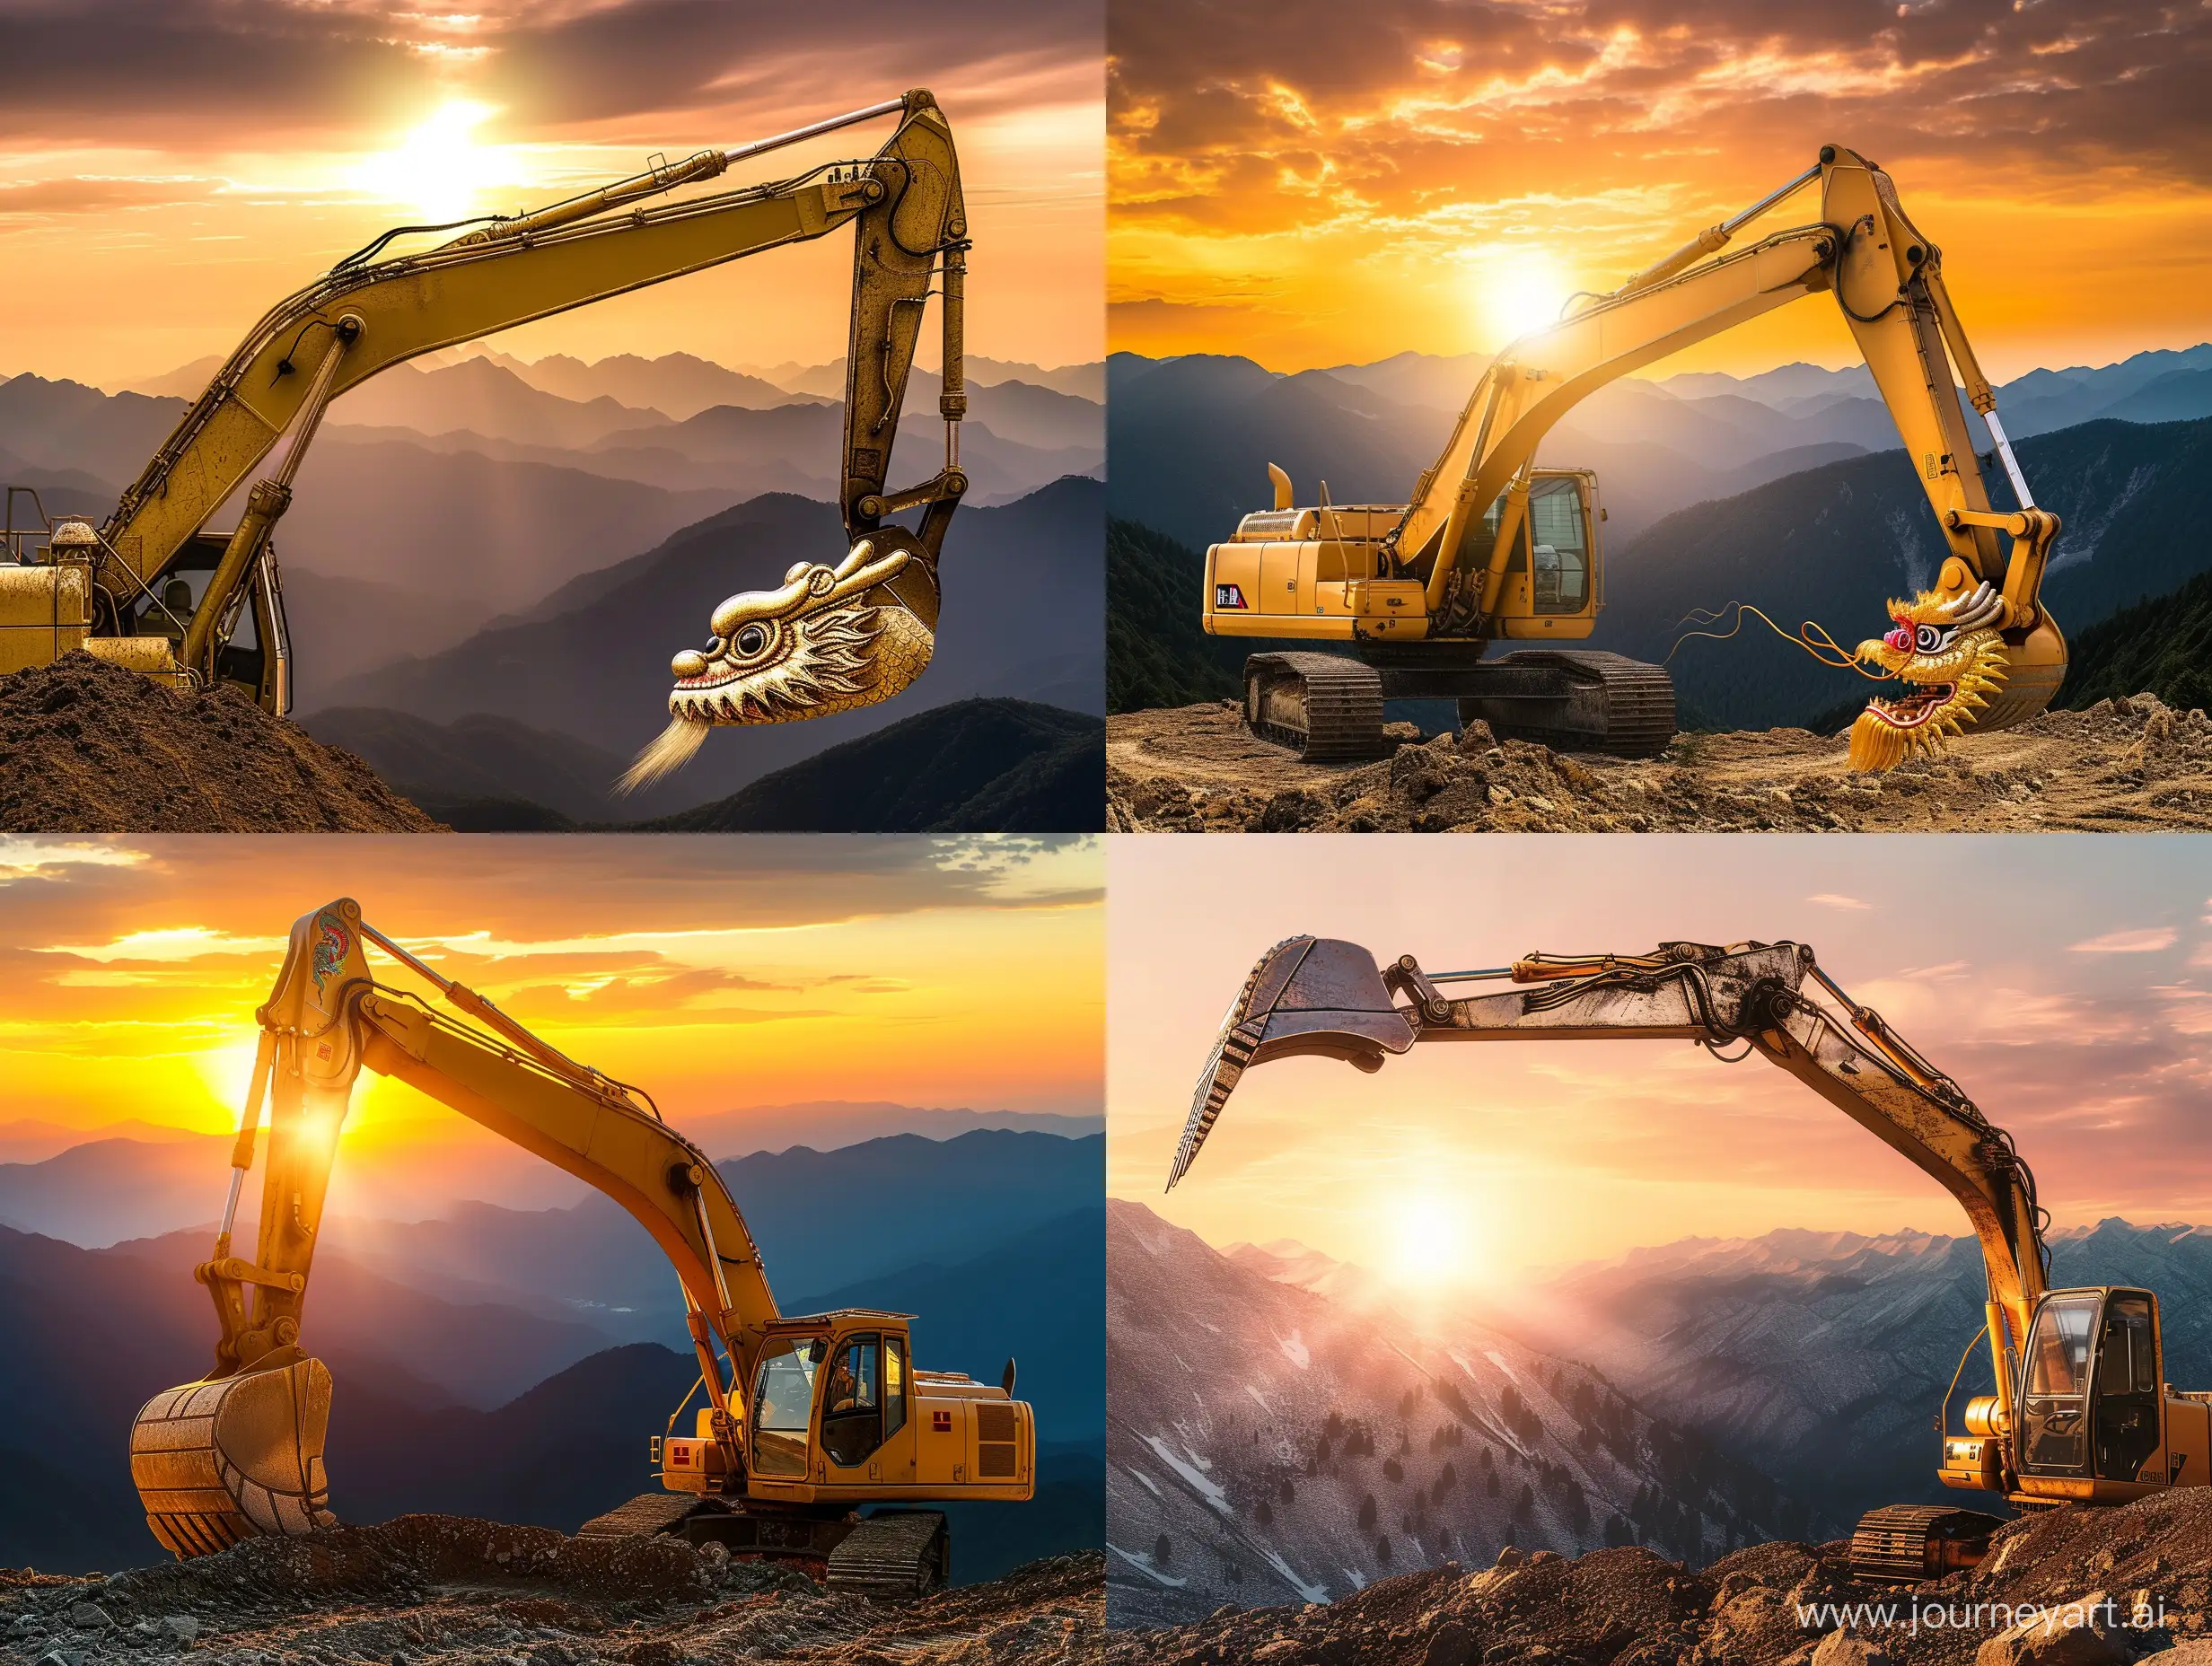 Majestic-Golden-Excavator-with-Dragon-Head-Sculpture-at-Sunset